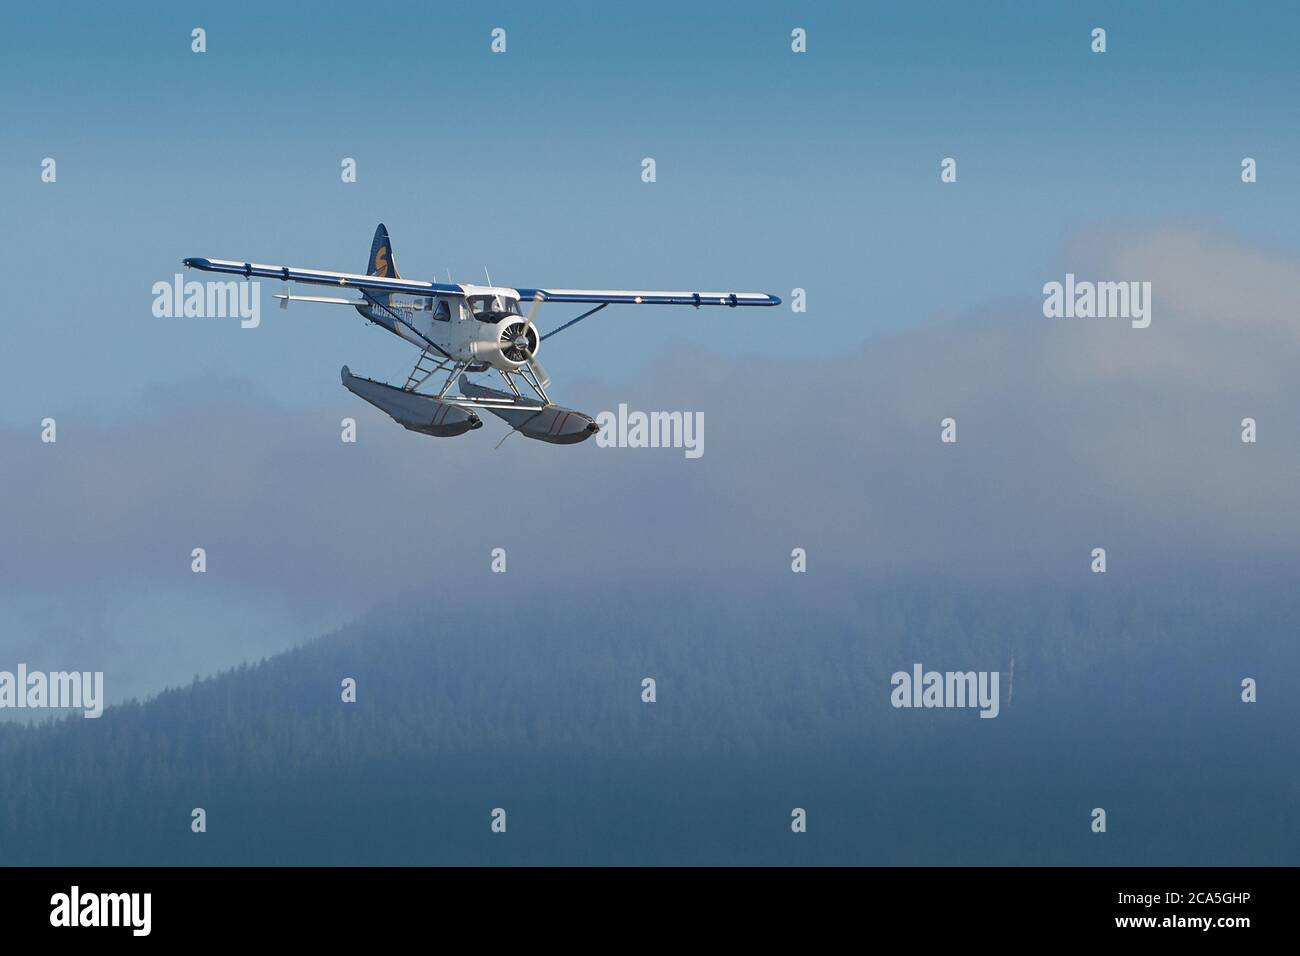 Saltspring Air DHC-2 Beaver Flying Over Remote Canadian Wilderness, British Columbia, Canada. Stock Photo